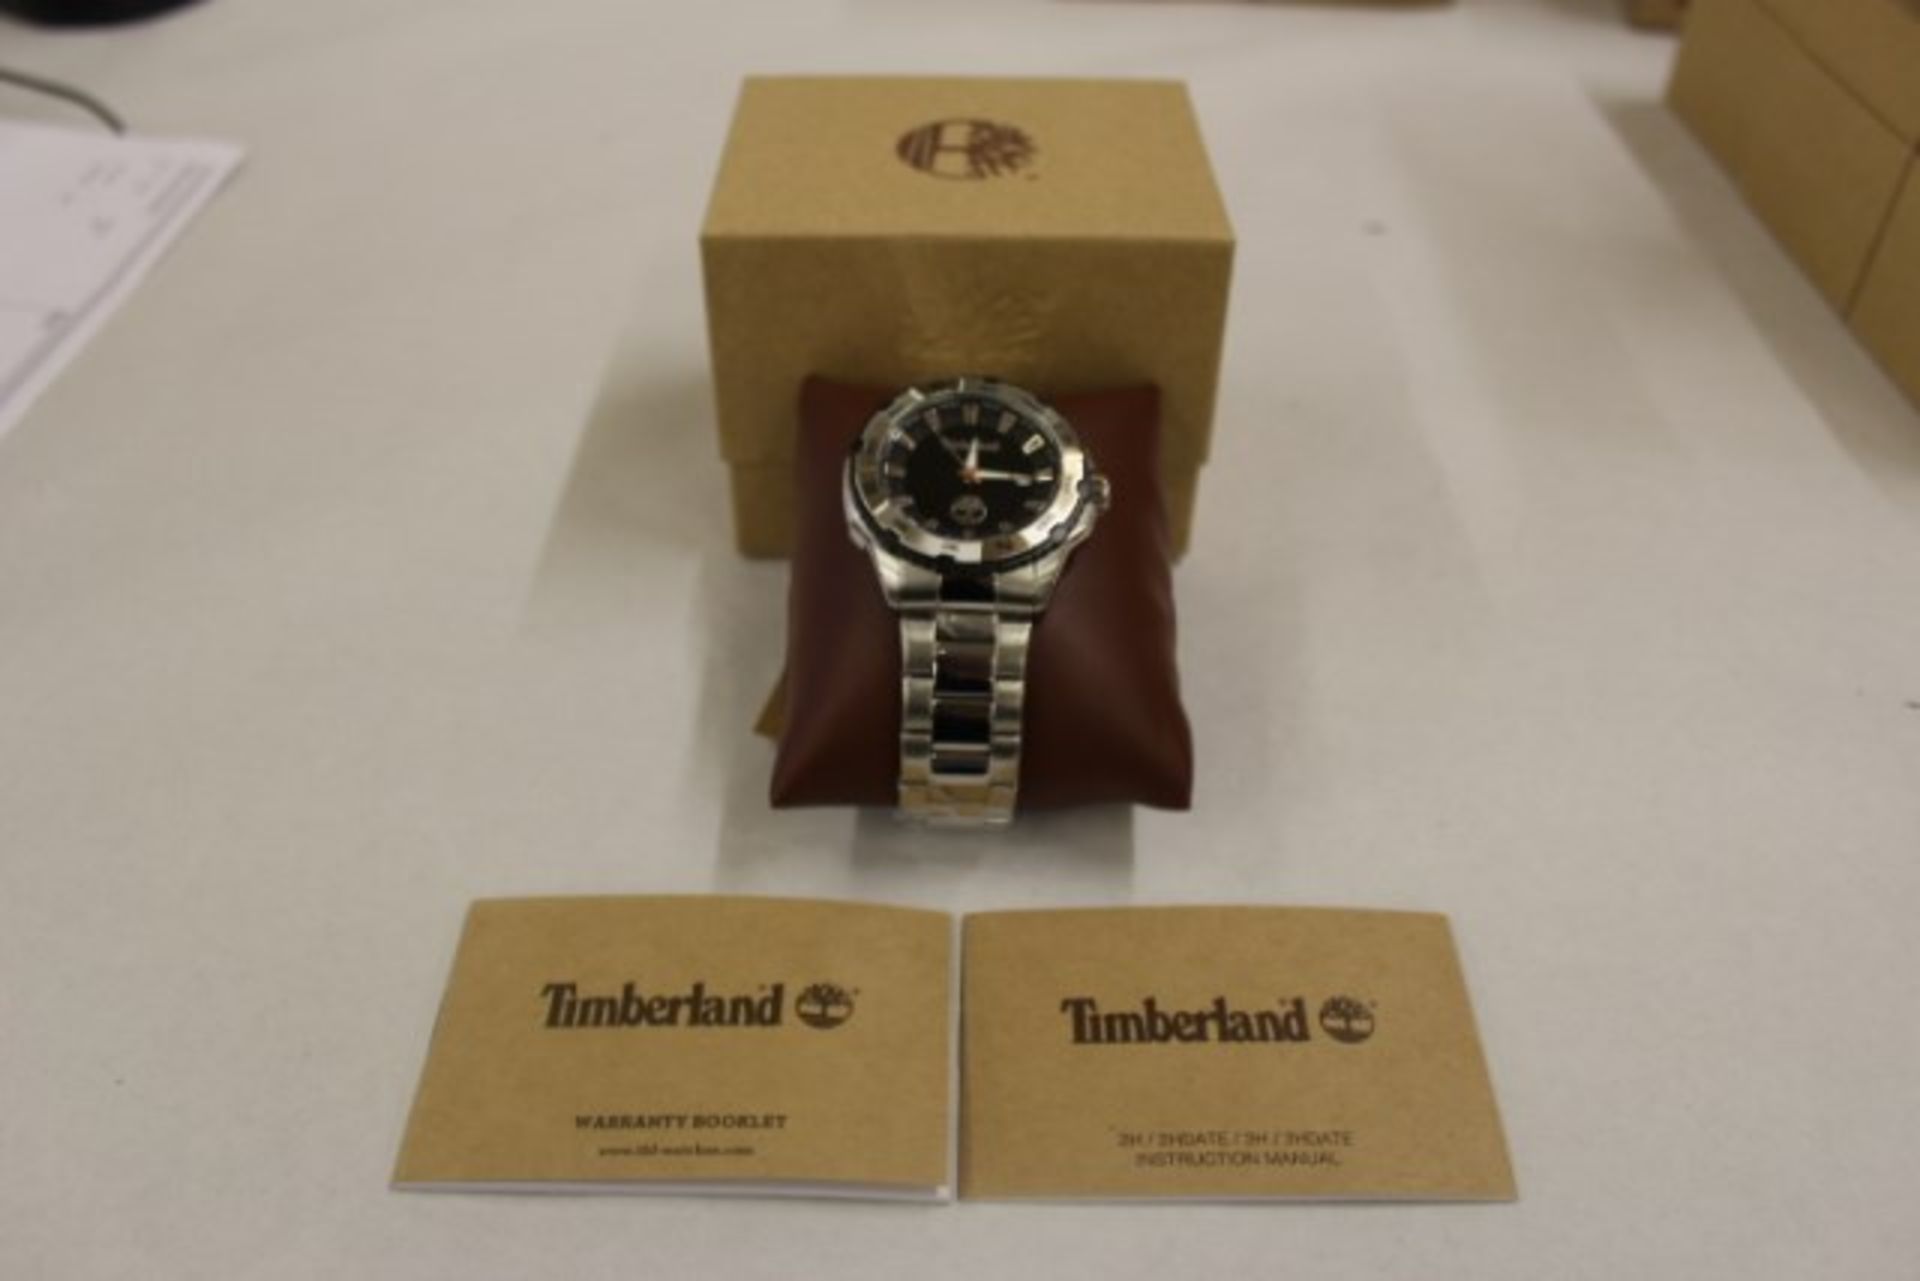 V Gents Timberland Black Date Face S/S Strap Watch With Box & Papers